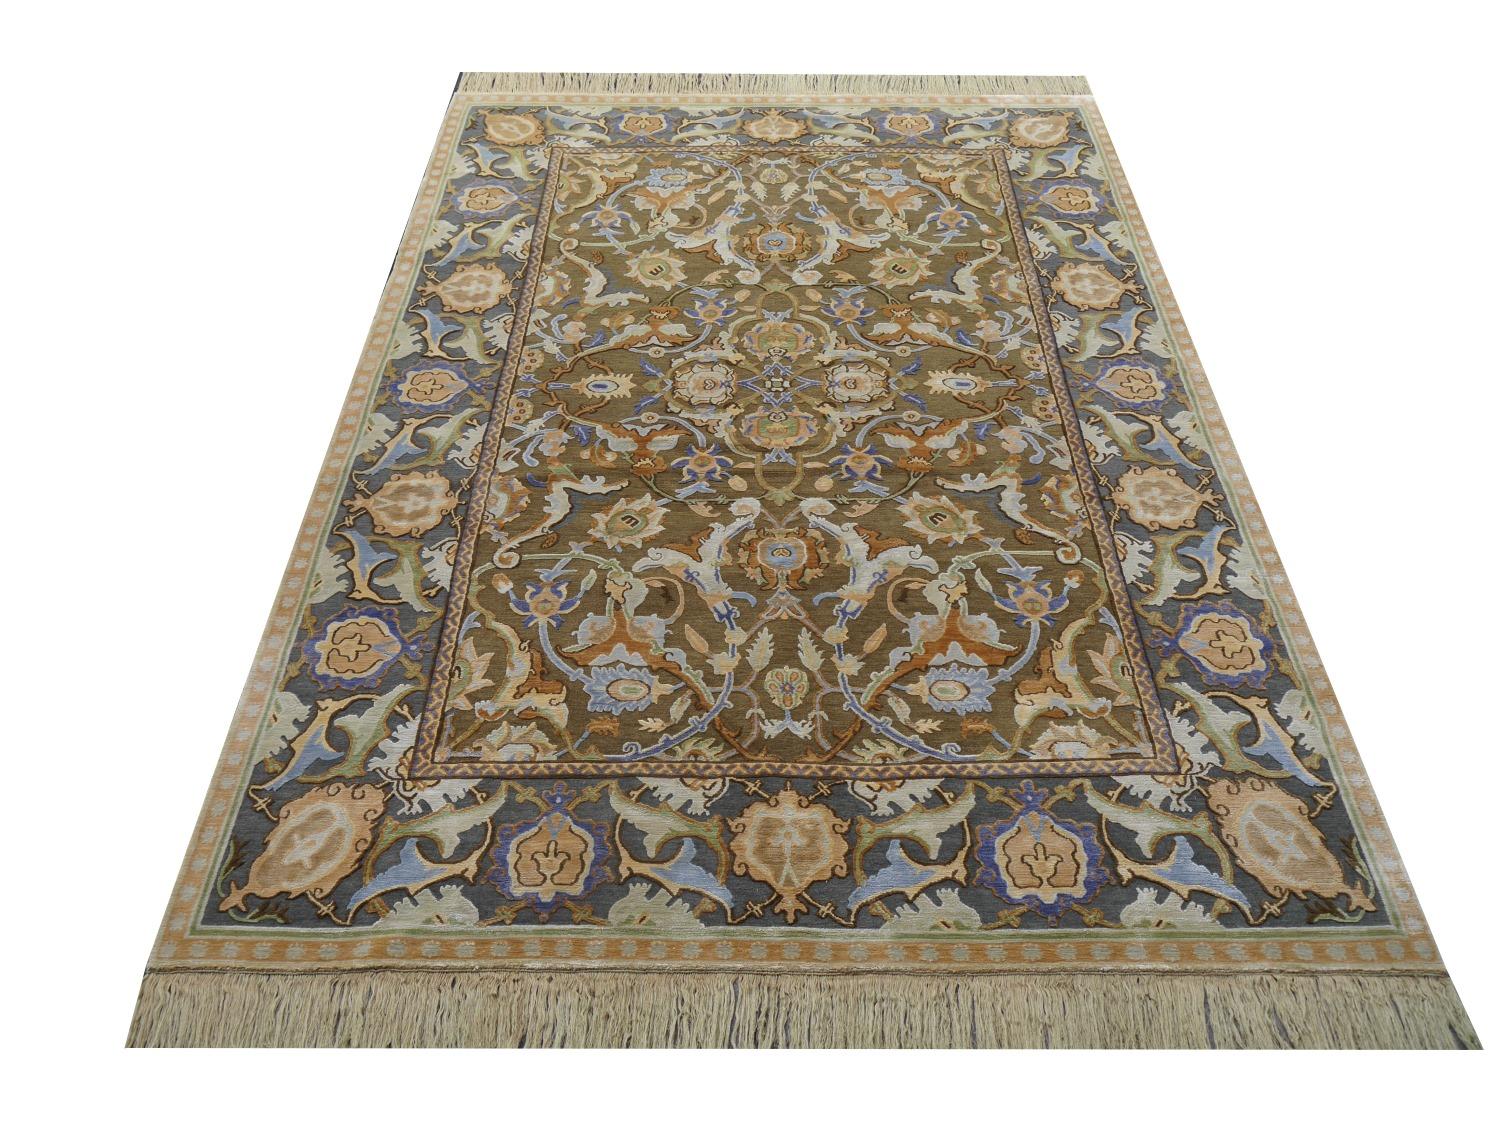 Renaissance Polonaise Rug Silk and Wool Antique Isfahan Design Bespoke Sizes For Sale